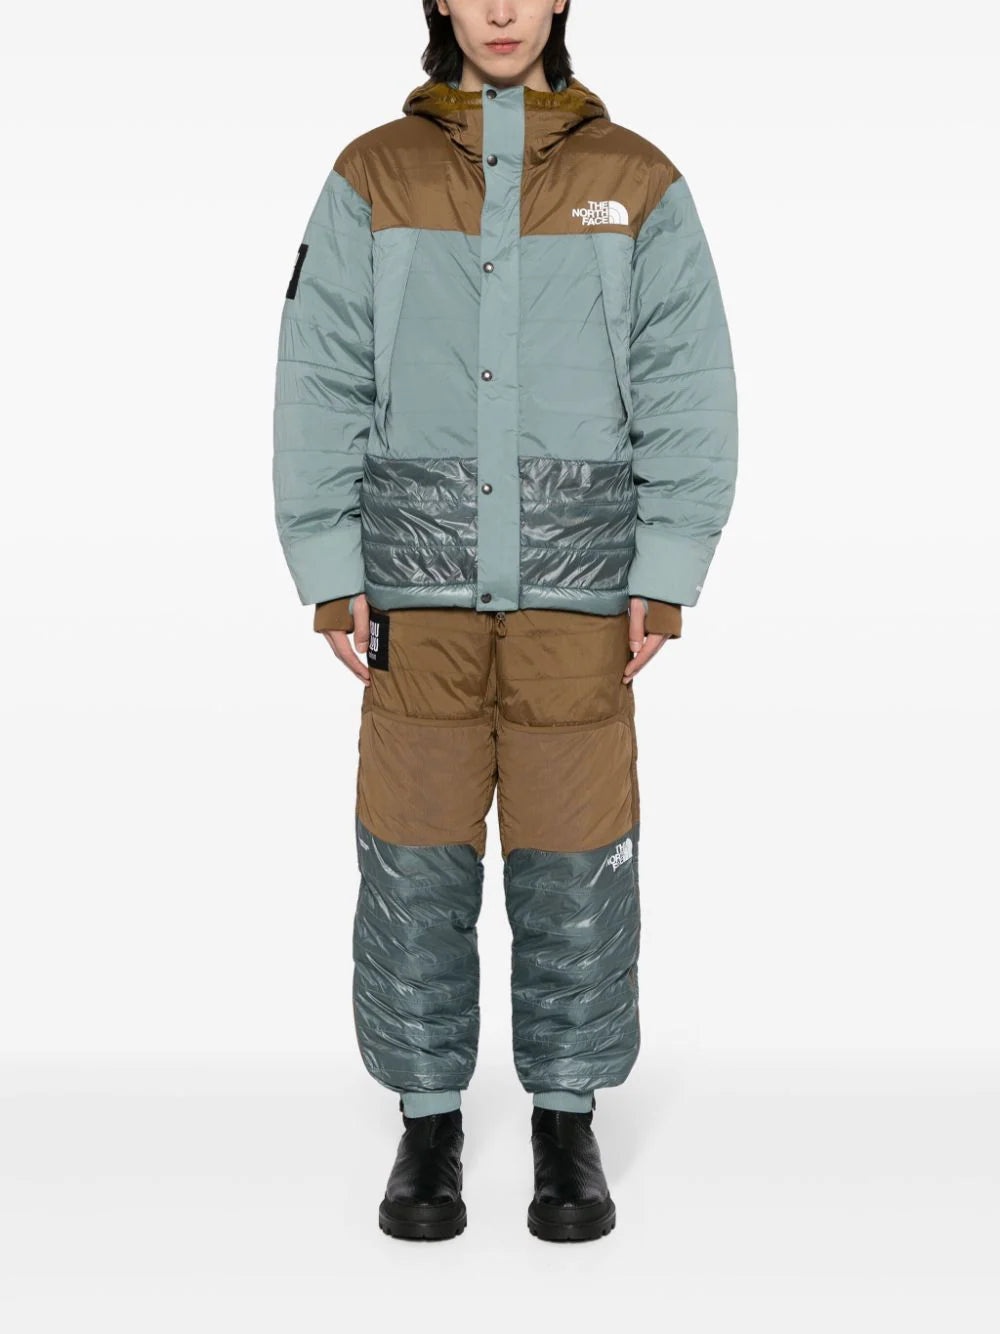 THE NORTH FACE X UNDERCOVER 50/50 Down Pants - 4